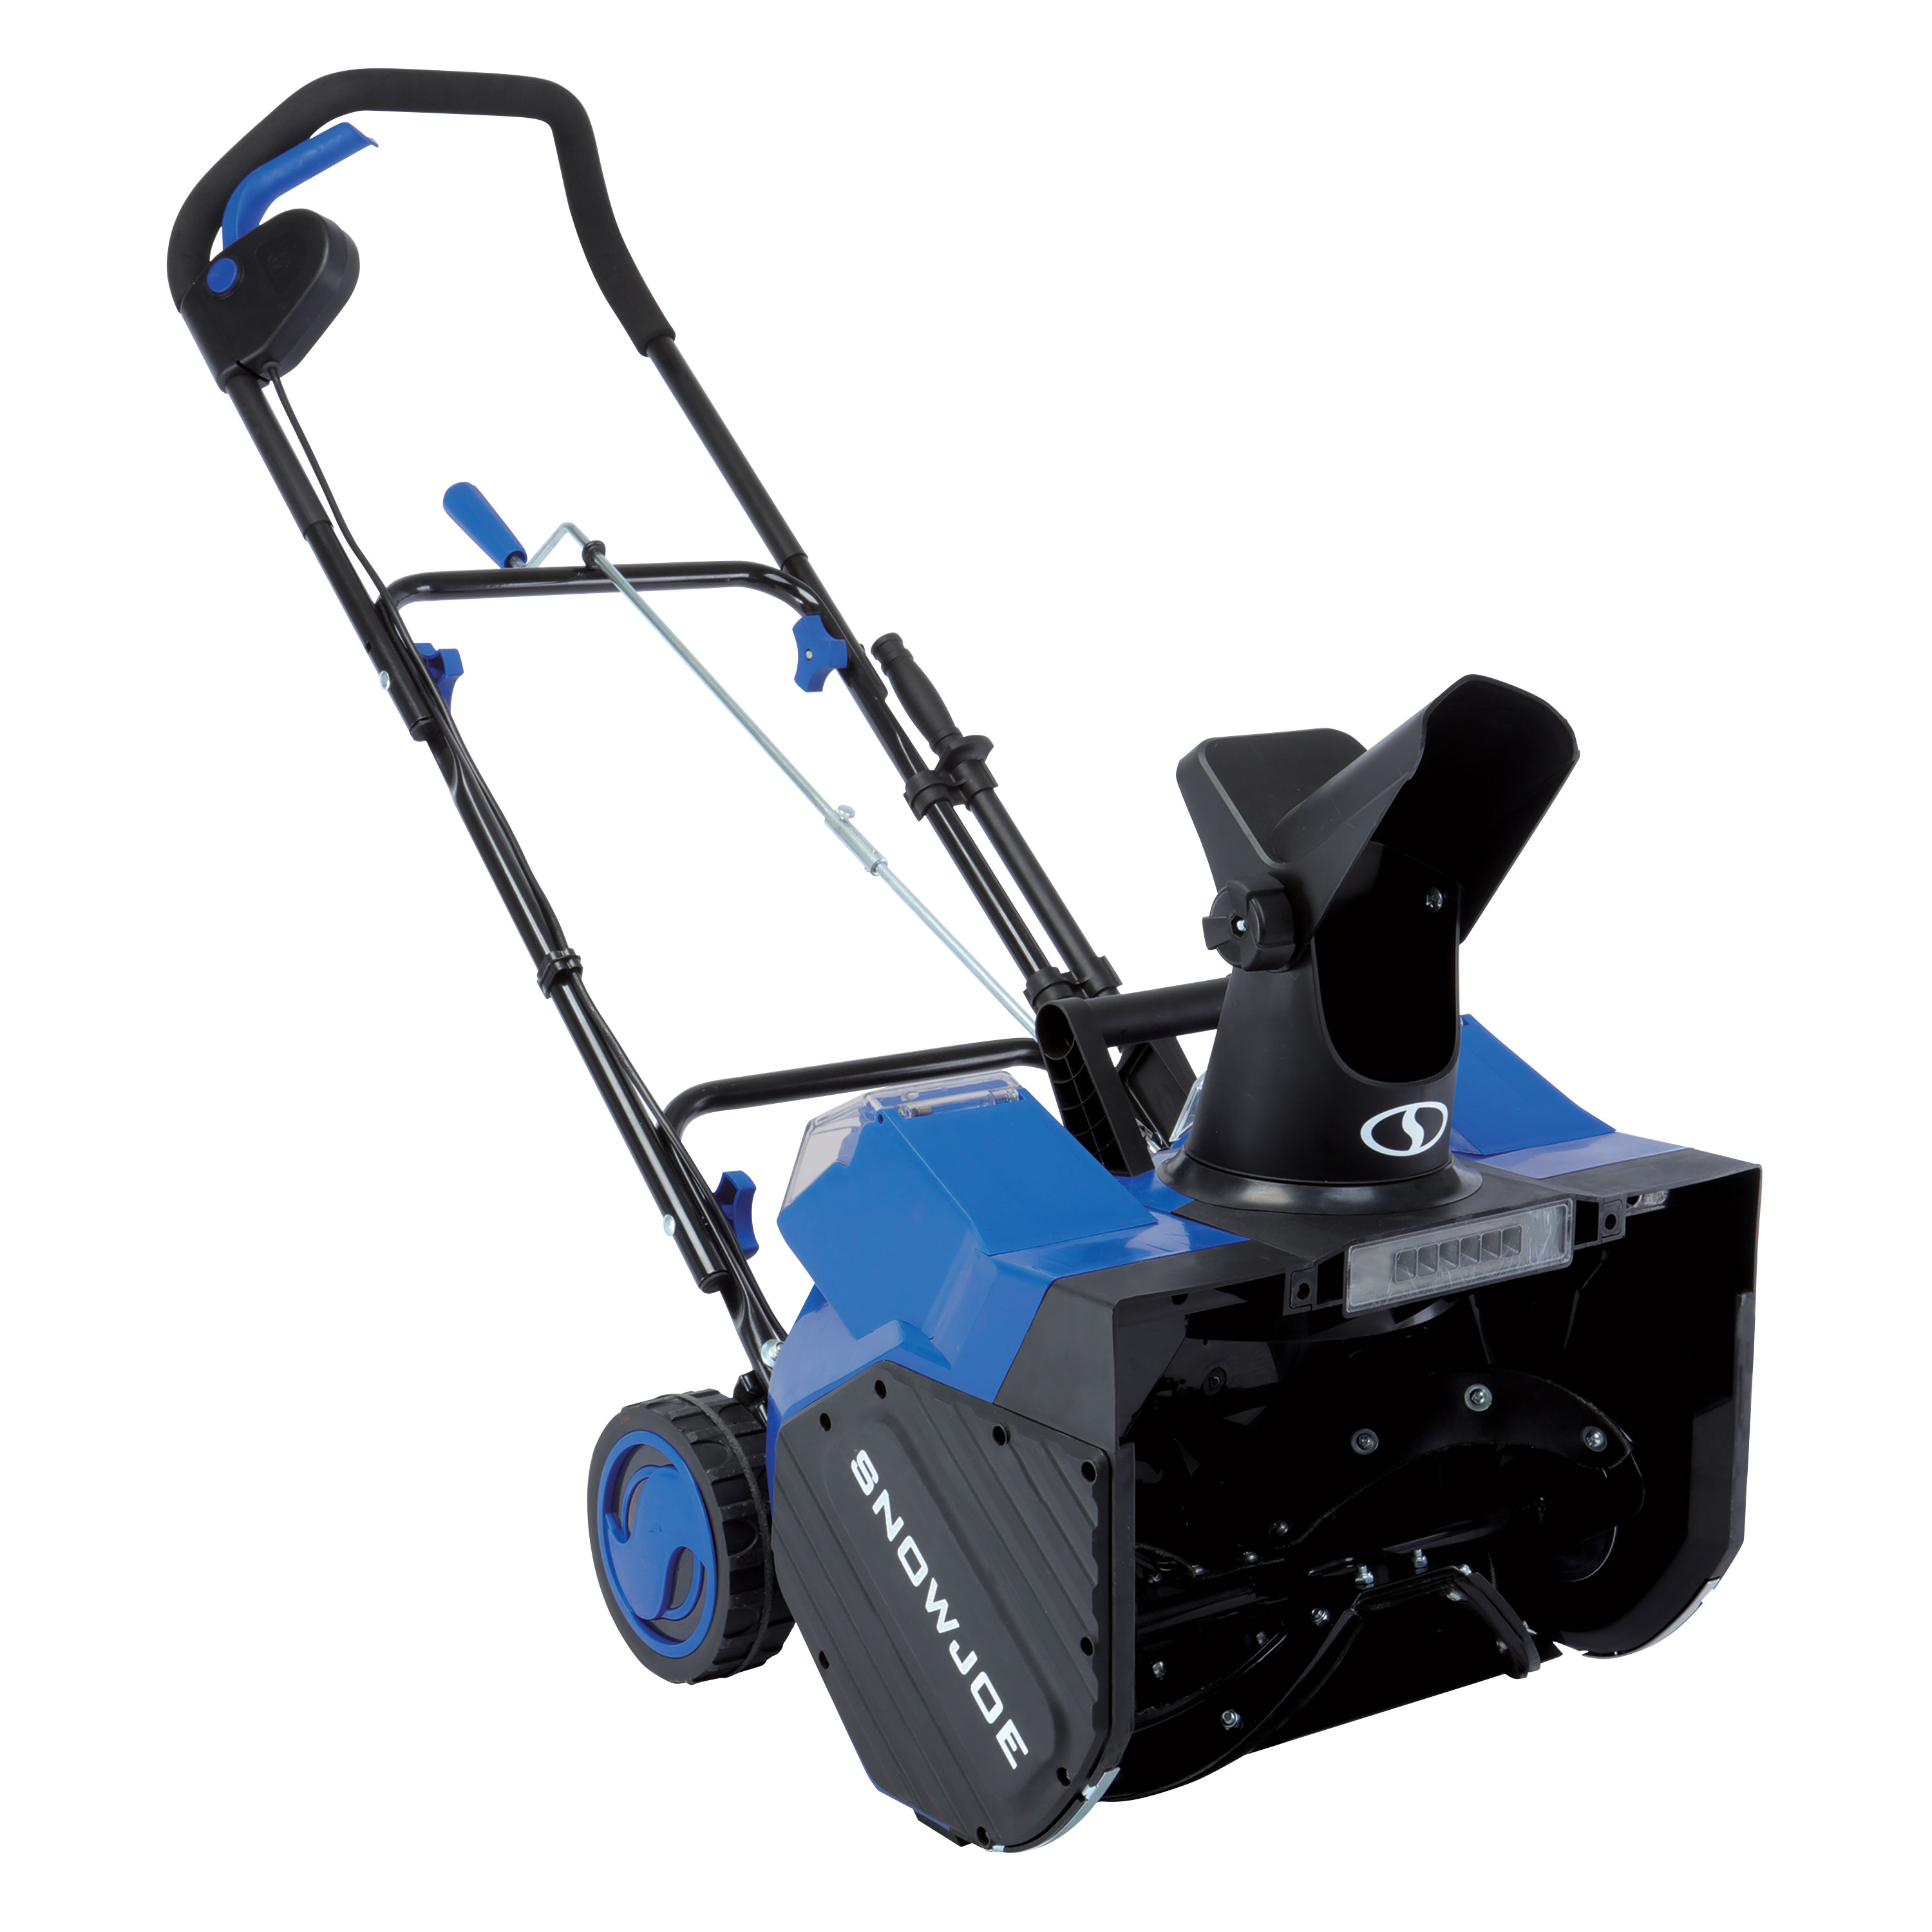 Snow Joe 48V 18-inch Single-Stage Cordless Snow Blower W/ Headlight, Brushless 1200W Motor, 2 x 4.0-Ah Batteries & Charger - image 11 of 18